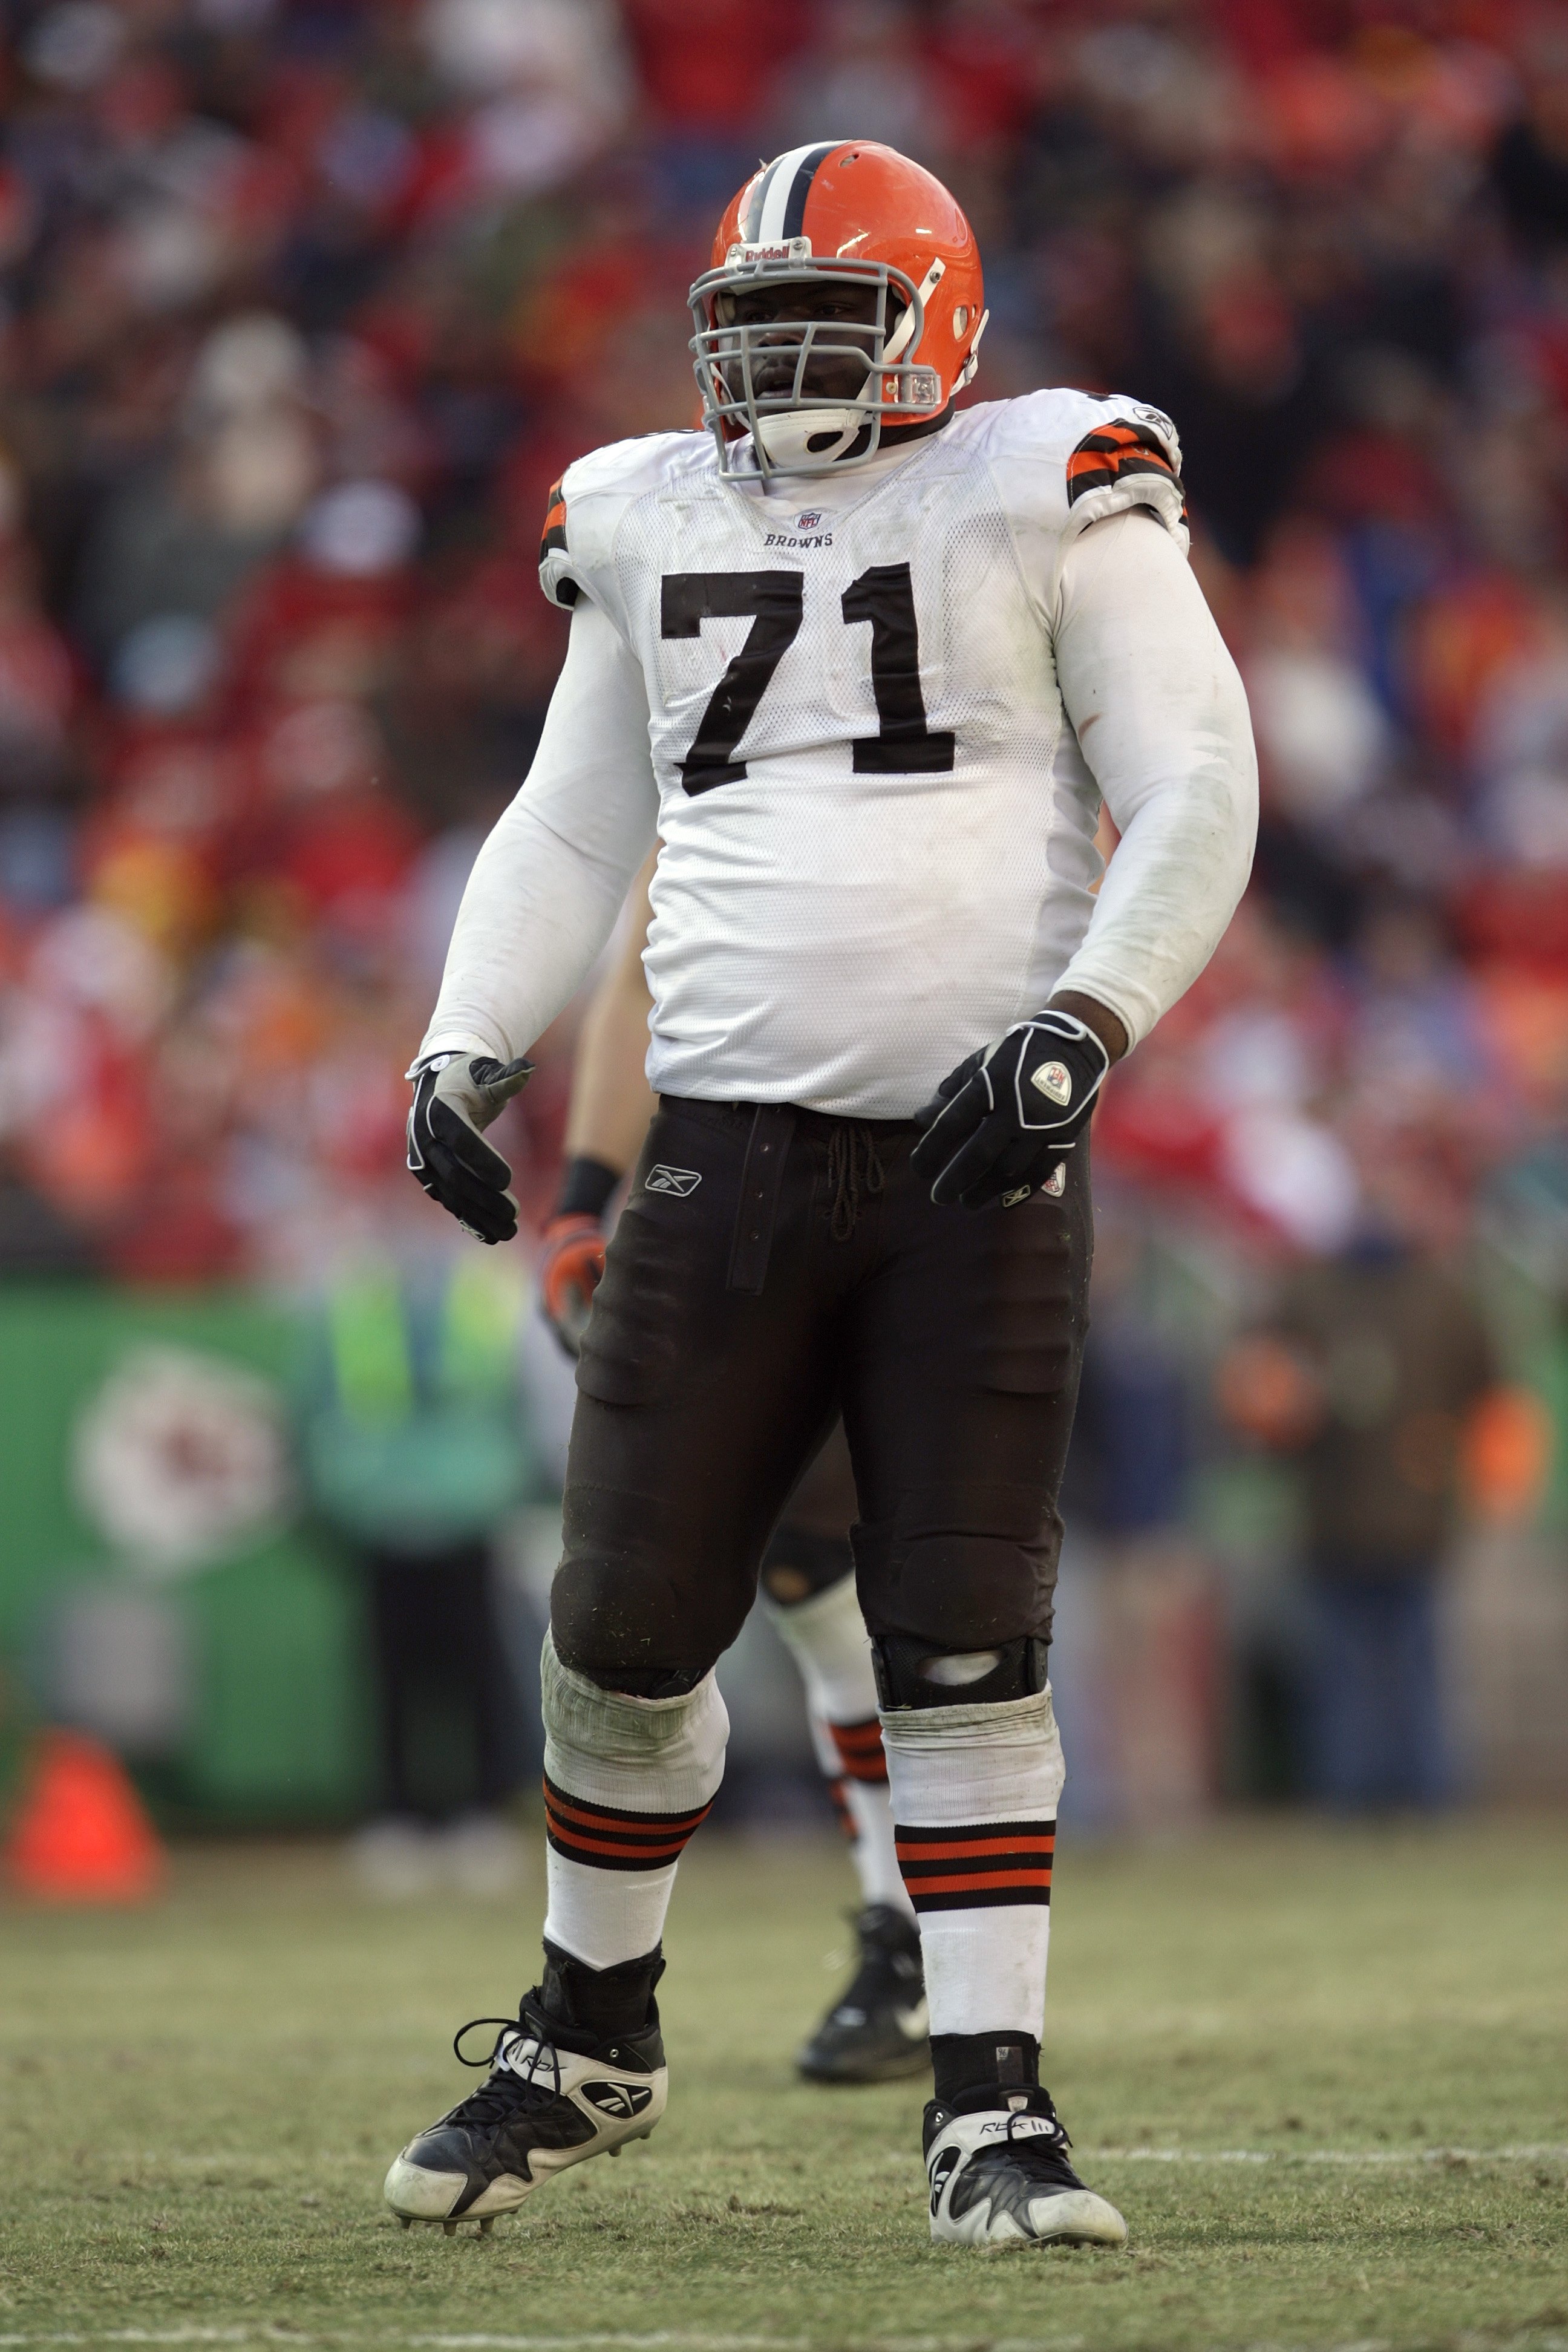 KANSAS CITY, MO - DECEMBER 20:  Ahtyba Rubin #71 of the Cleveland Browns looks on during their NFL game against the Kansas City Chiefs on December 20, 2009 at Arrowhead Stadium in Kansas City, Missouri. The Browns defeated the Chiefs 41-34. (Photo by Jami